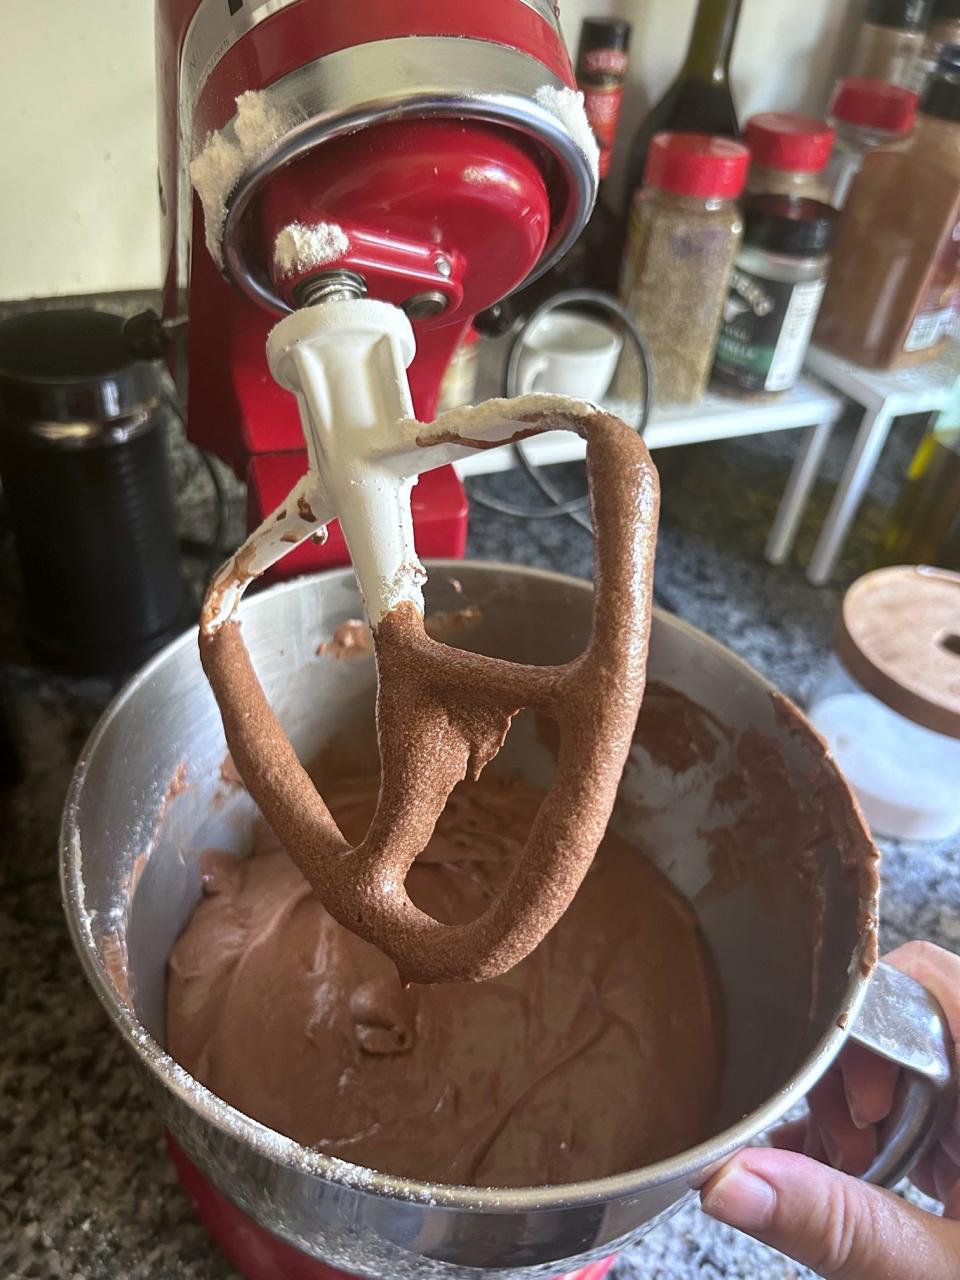 Batter for Ina Garten's chocolate cake with mocha frosting